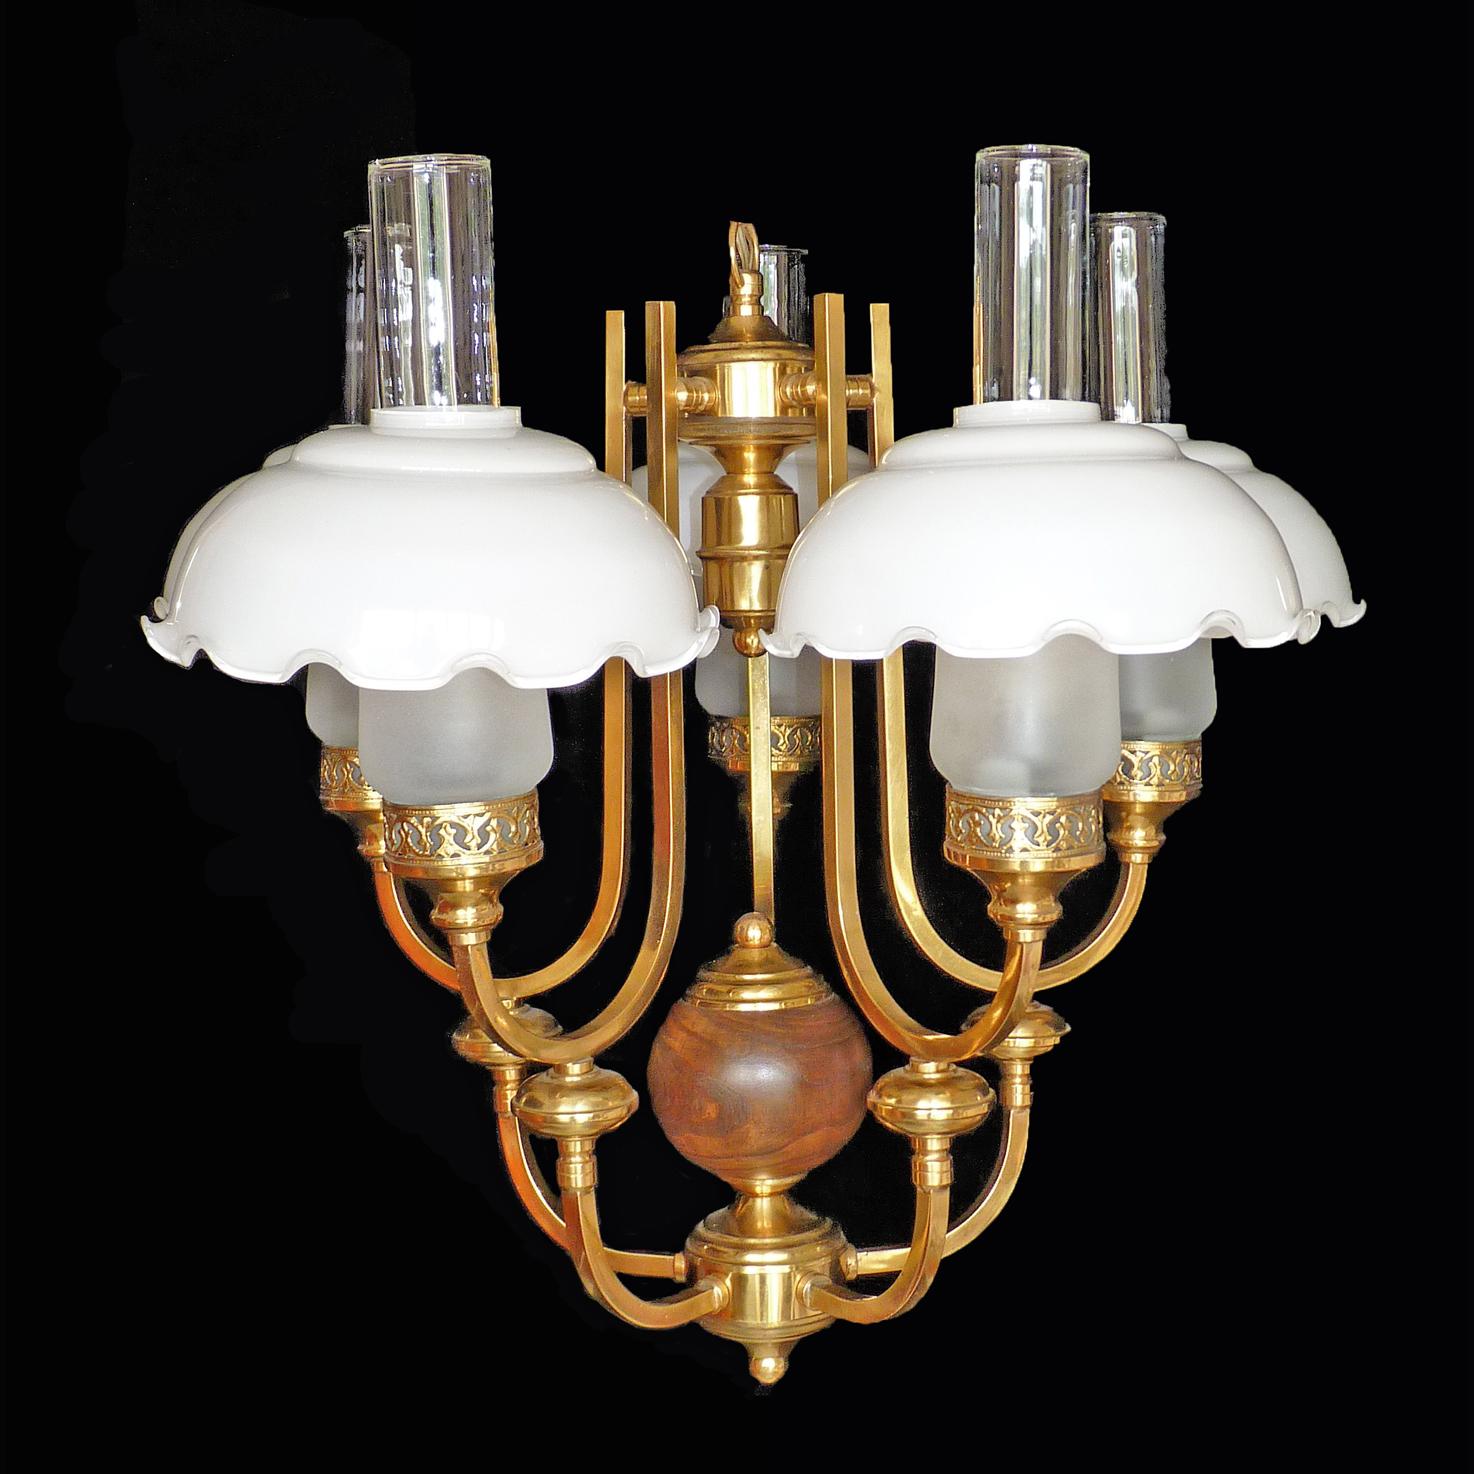 20th Century French Art Deco Library Oil Lamp Chandelier Gilt Brass Wood Opaline Glass Shades For Sale